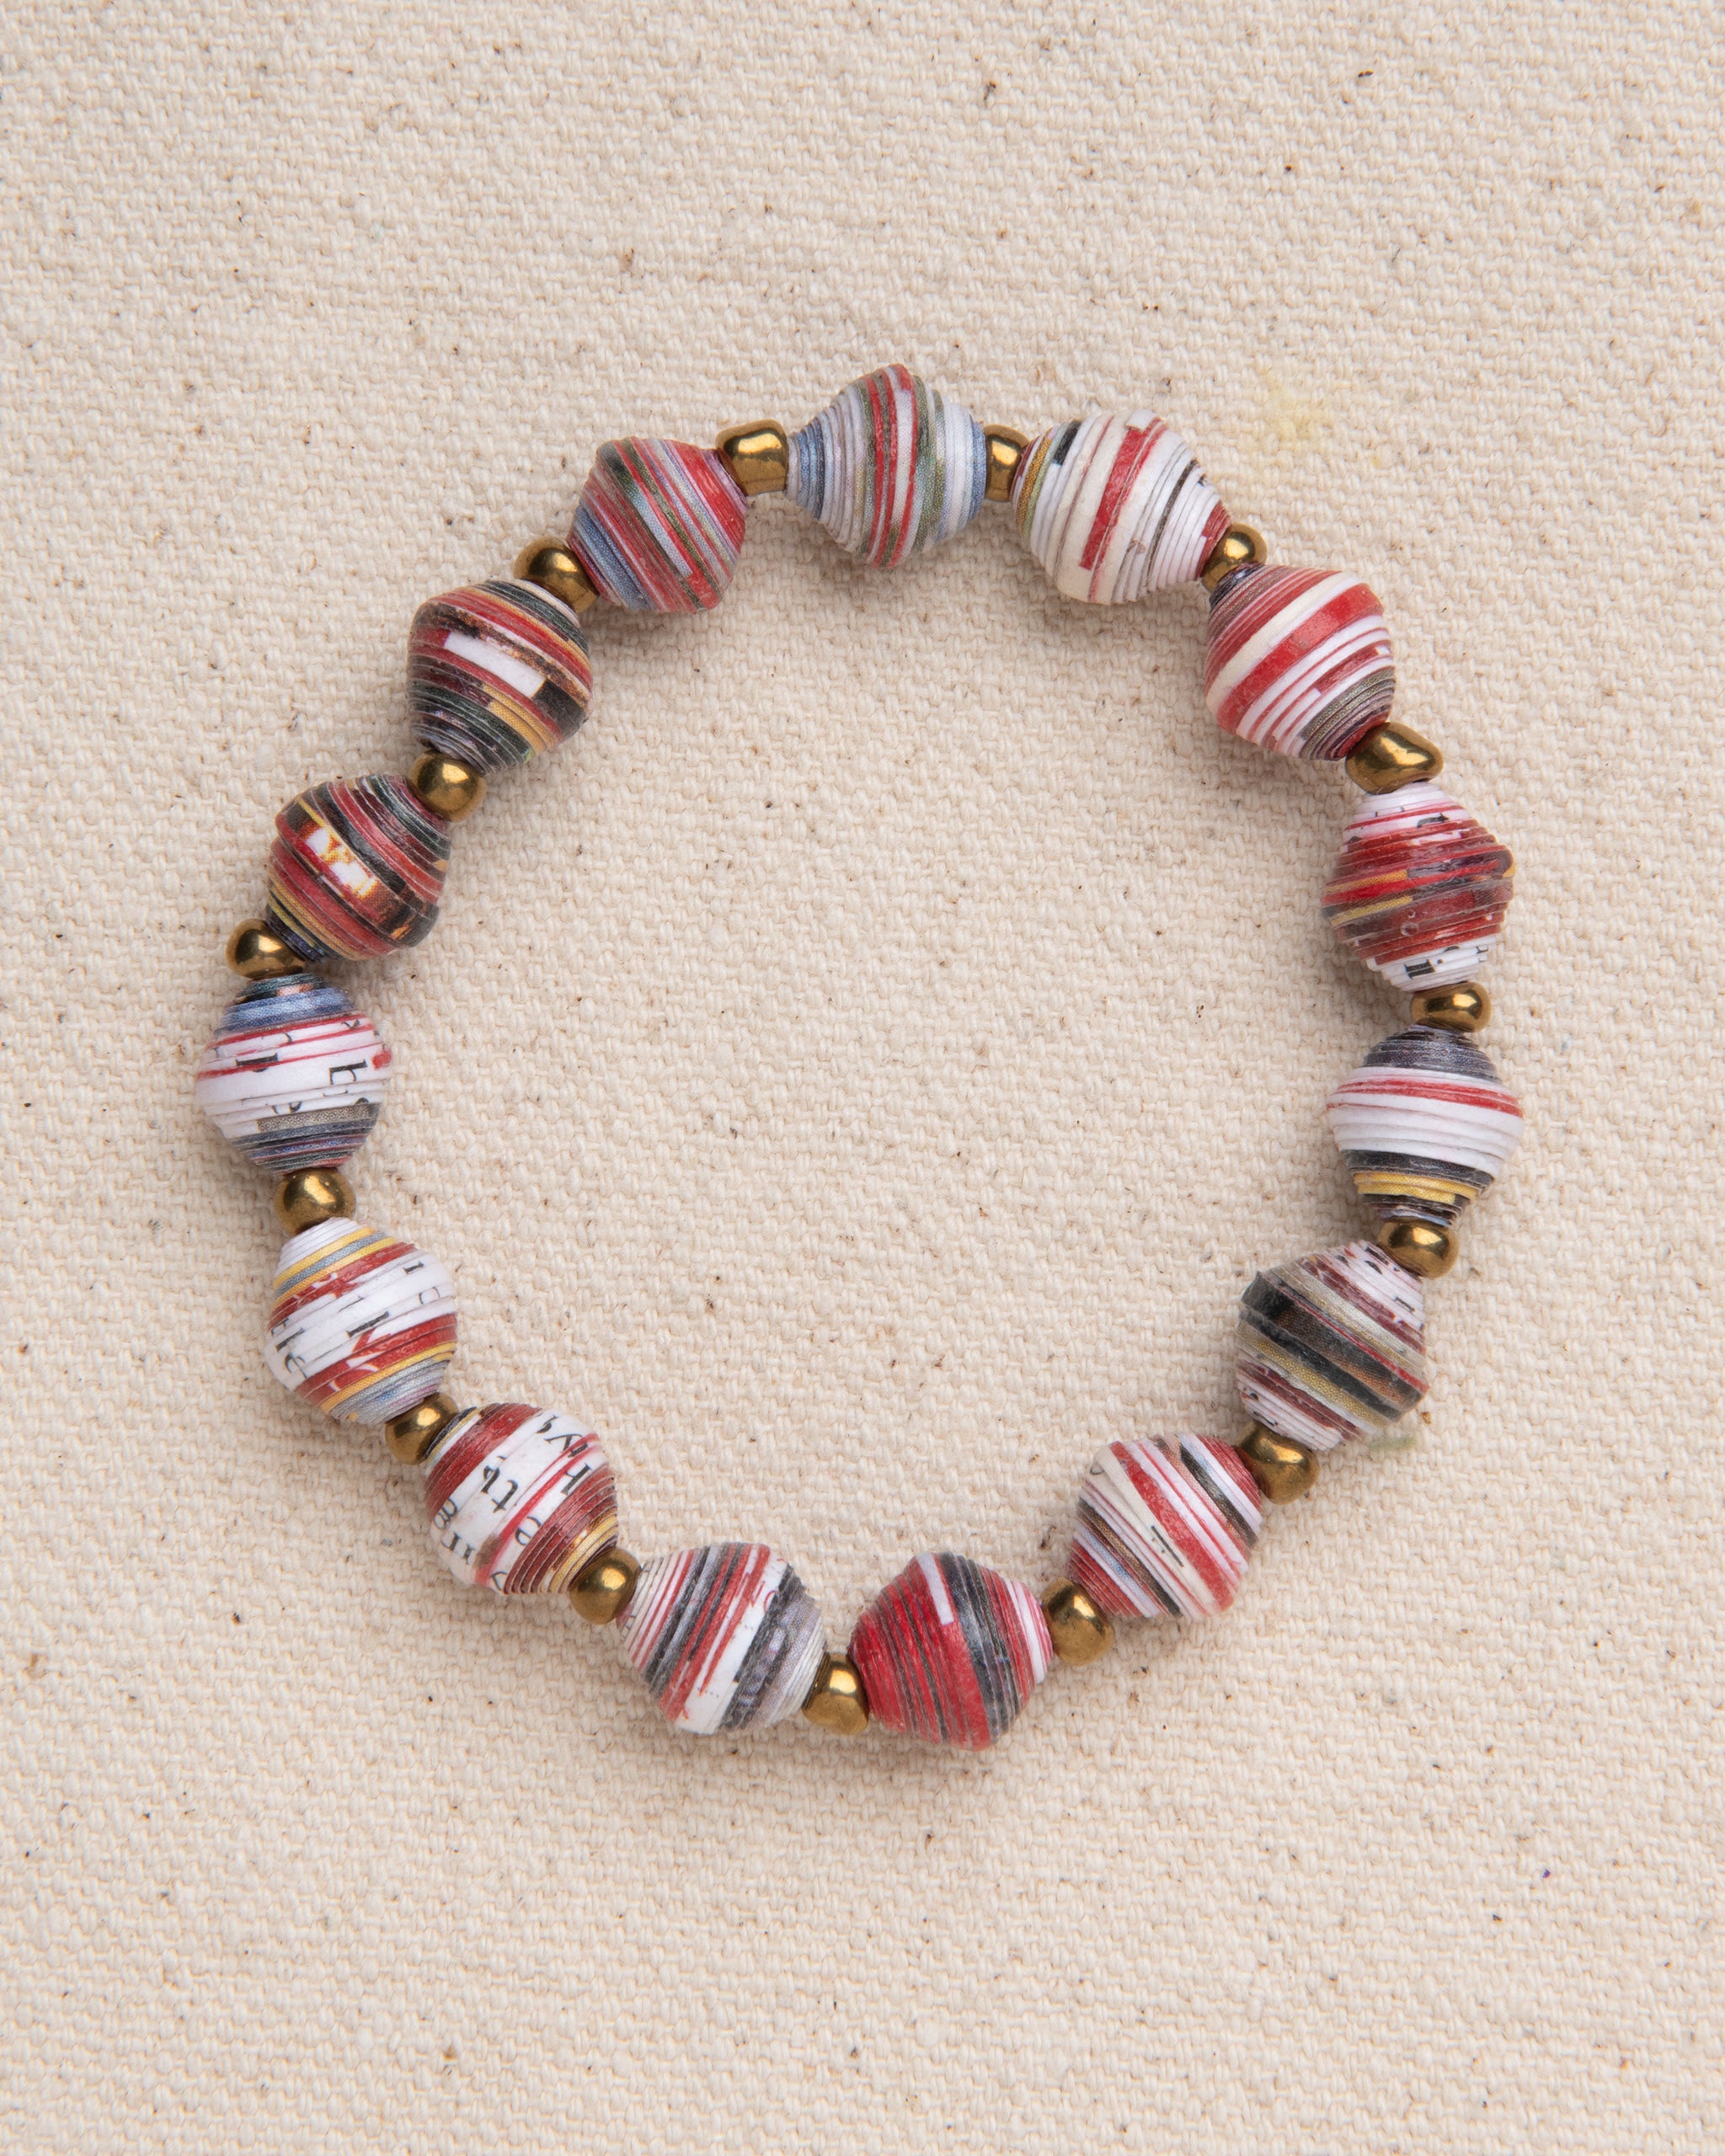 Paper Beads You Can Make in Minutes  Mod Podge Rocks